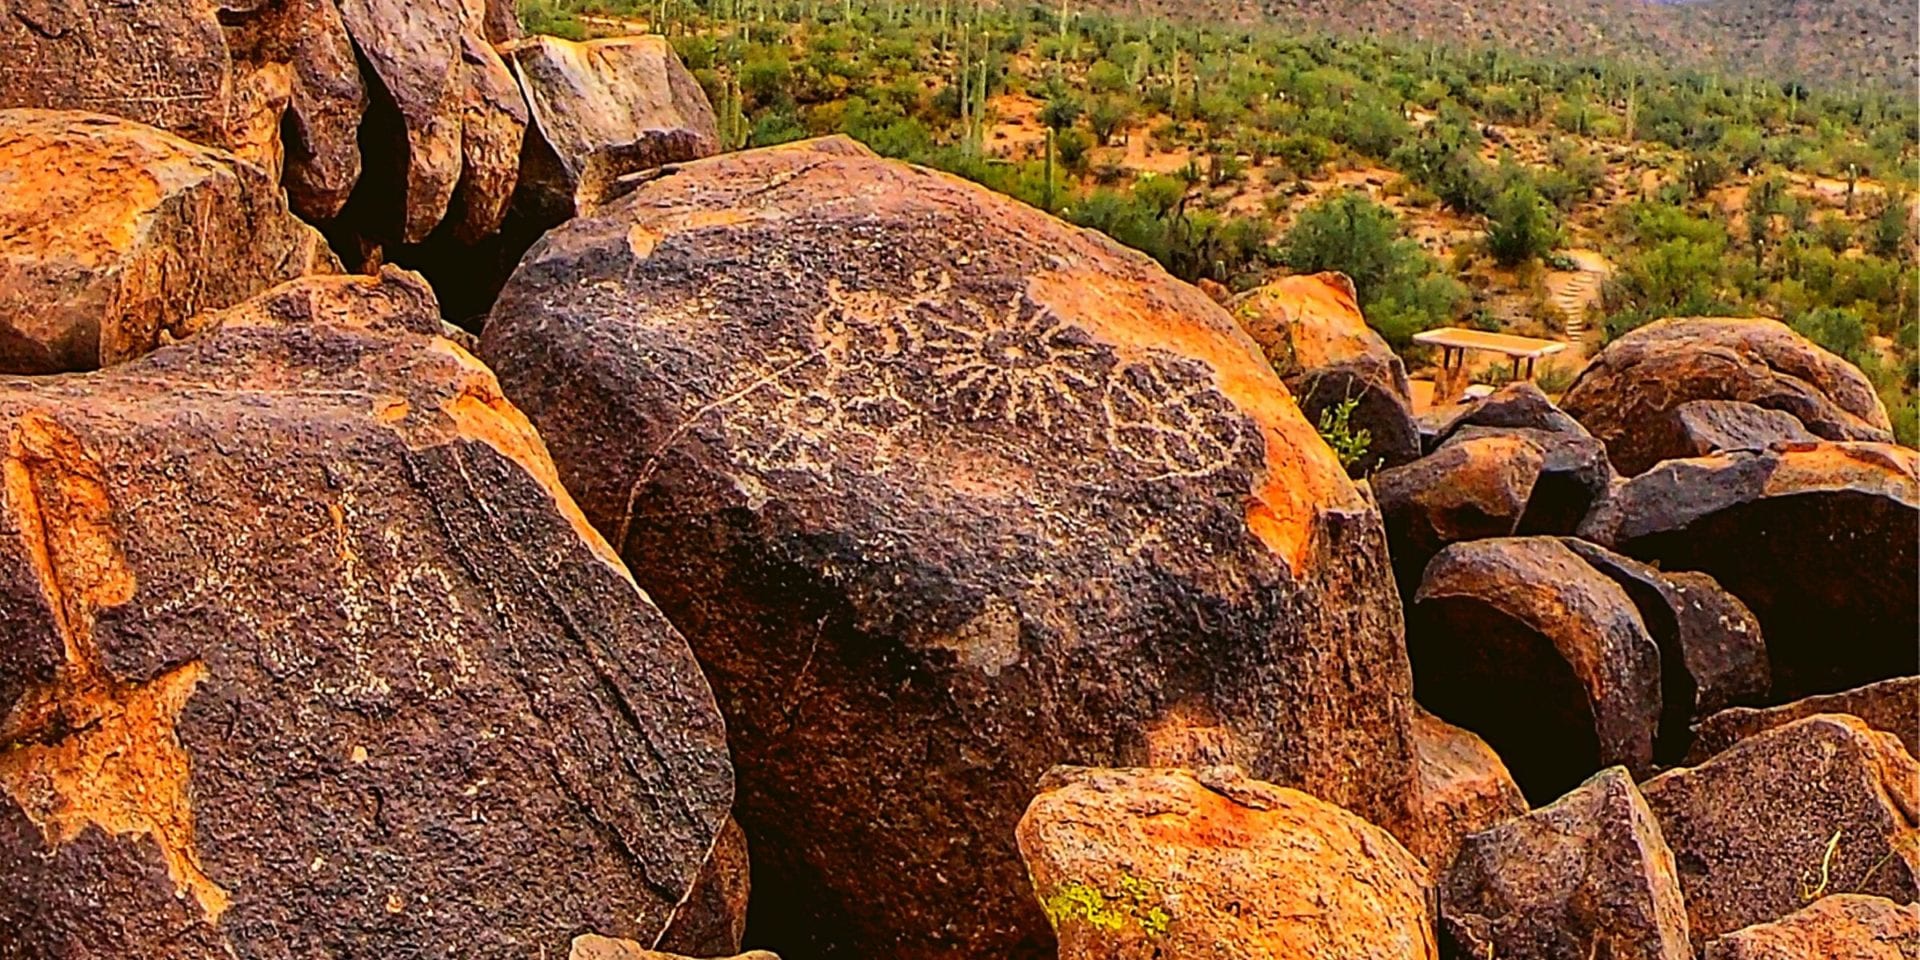 Petroglyph Park and Museum
